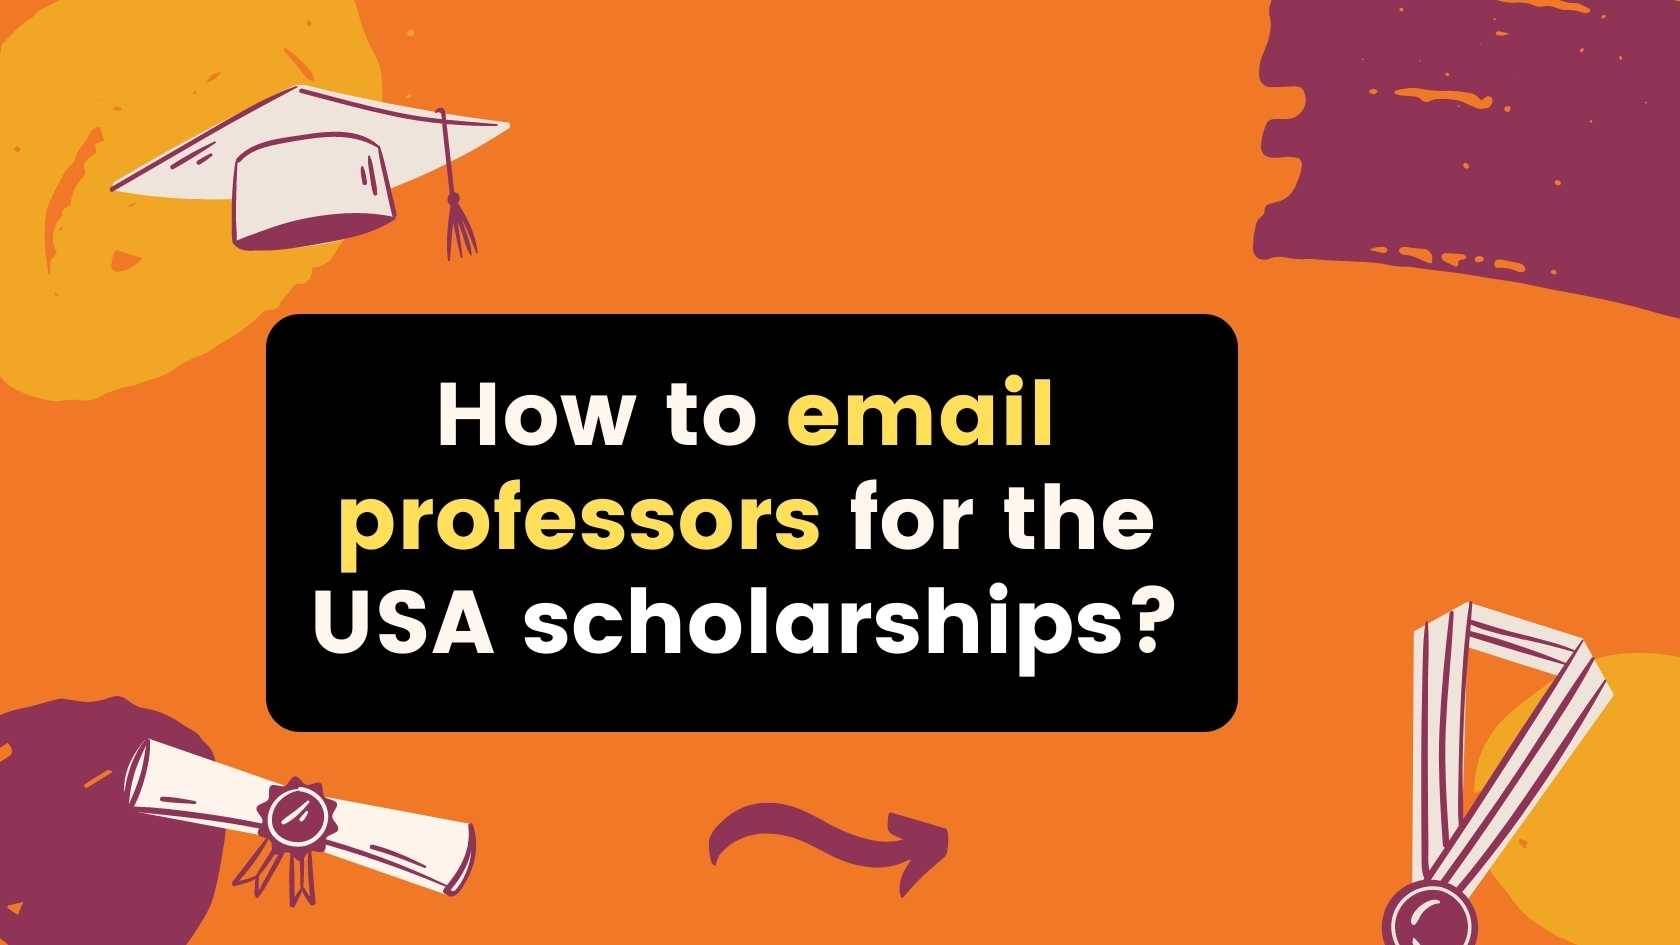 How to email professors for the USA scholarships?